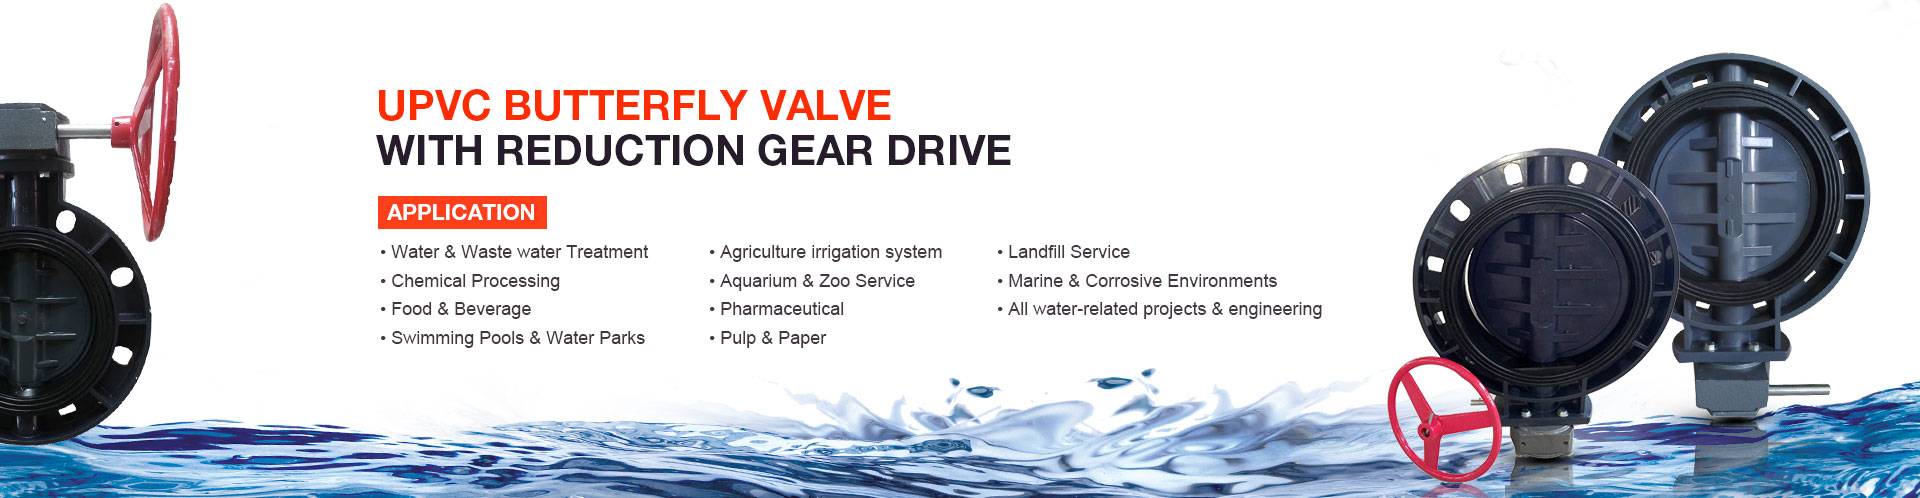 UPVC-Butterfly-Valve-with-Reduction-Gear-Drive